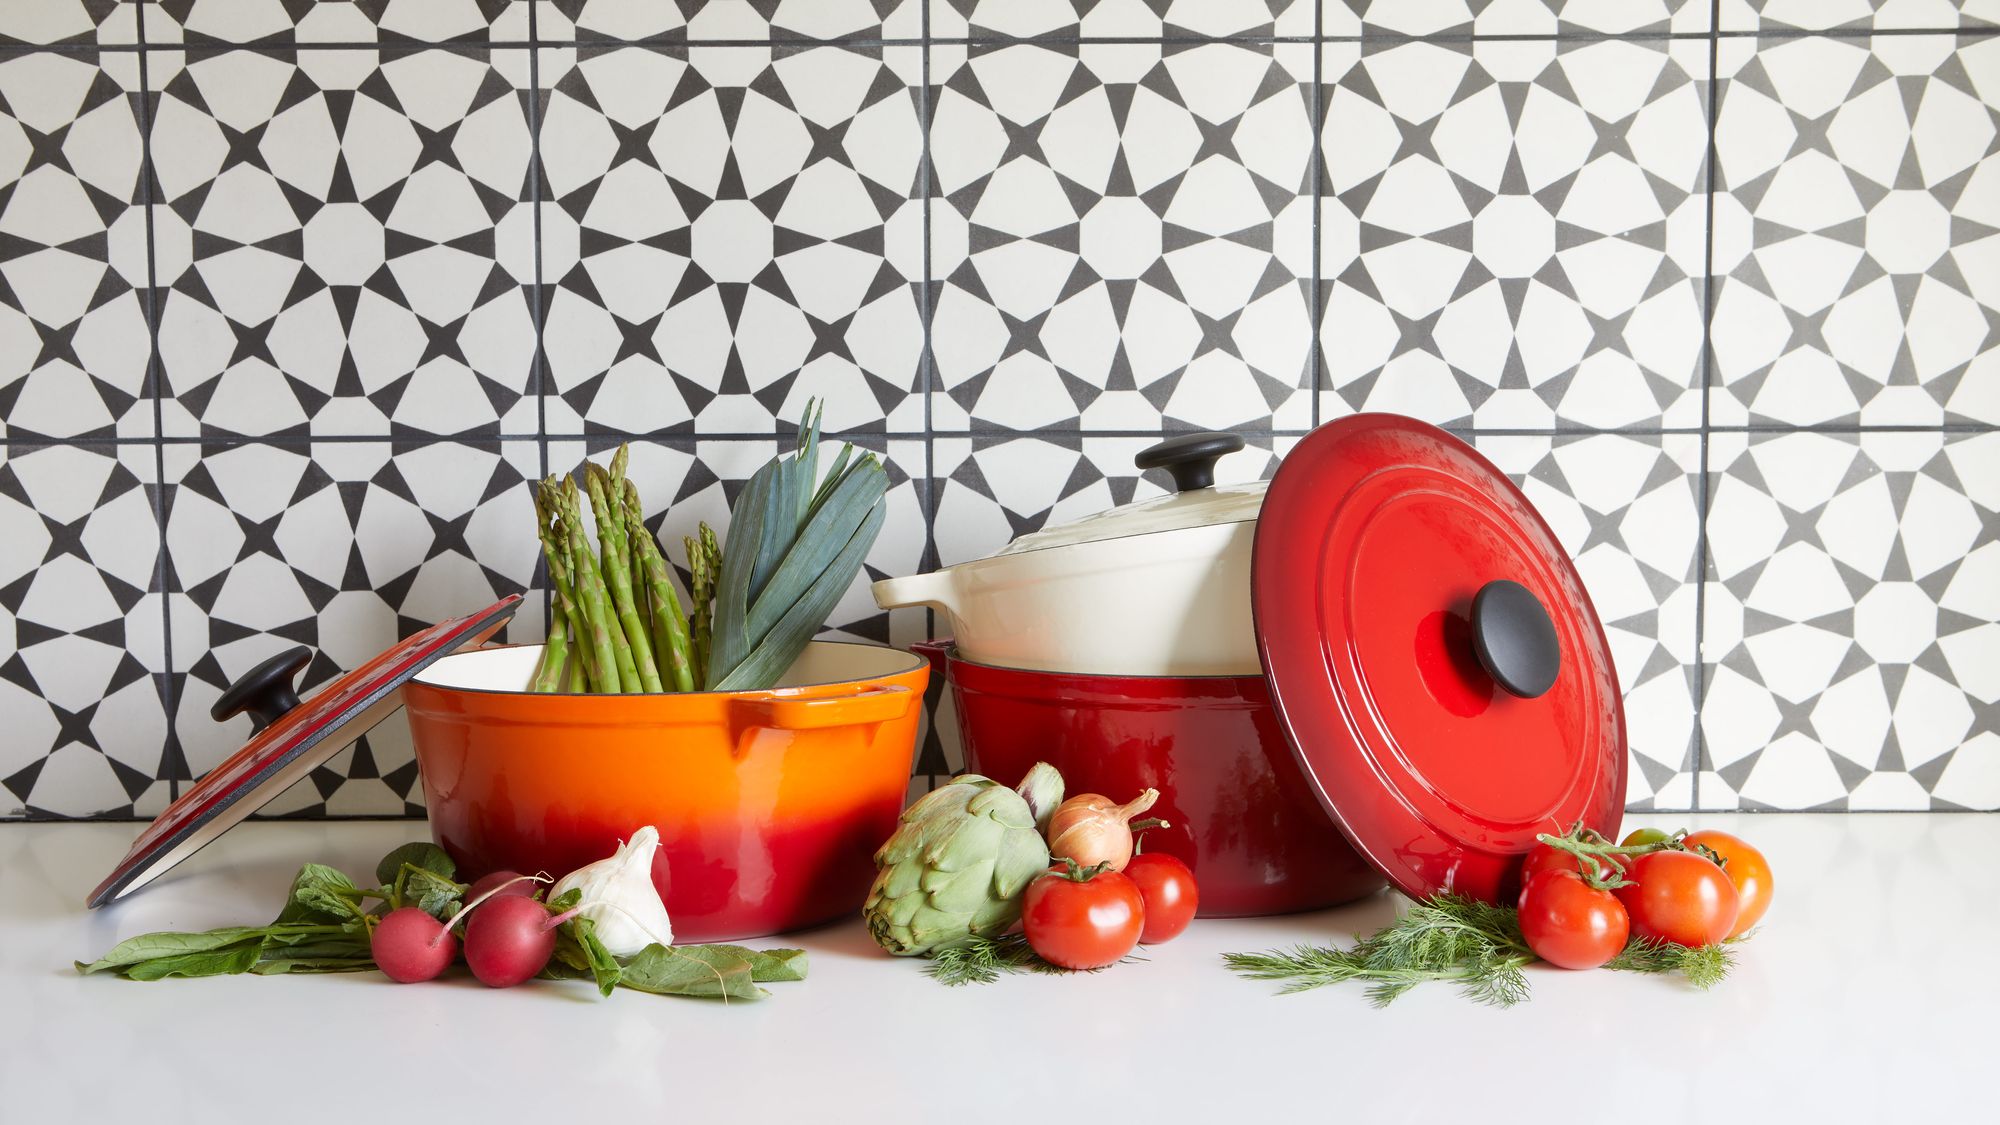 Meet Our Place: The brand revolutionizing multi-purpose cookware